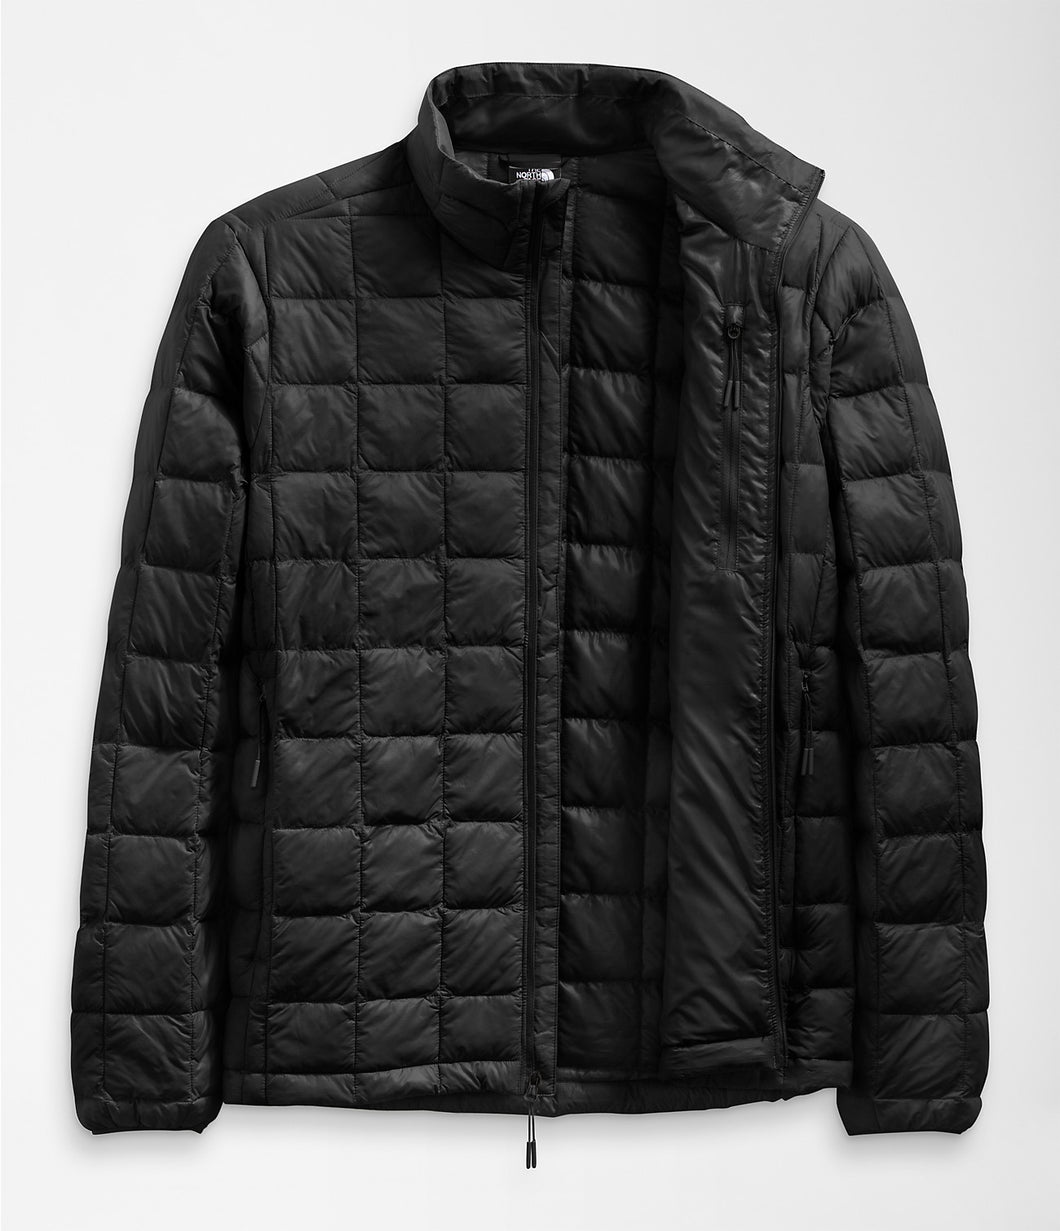 North Face-Men's Thermoball Jacket-Black